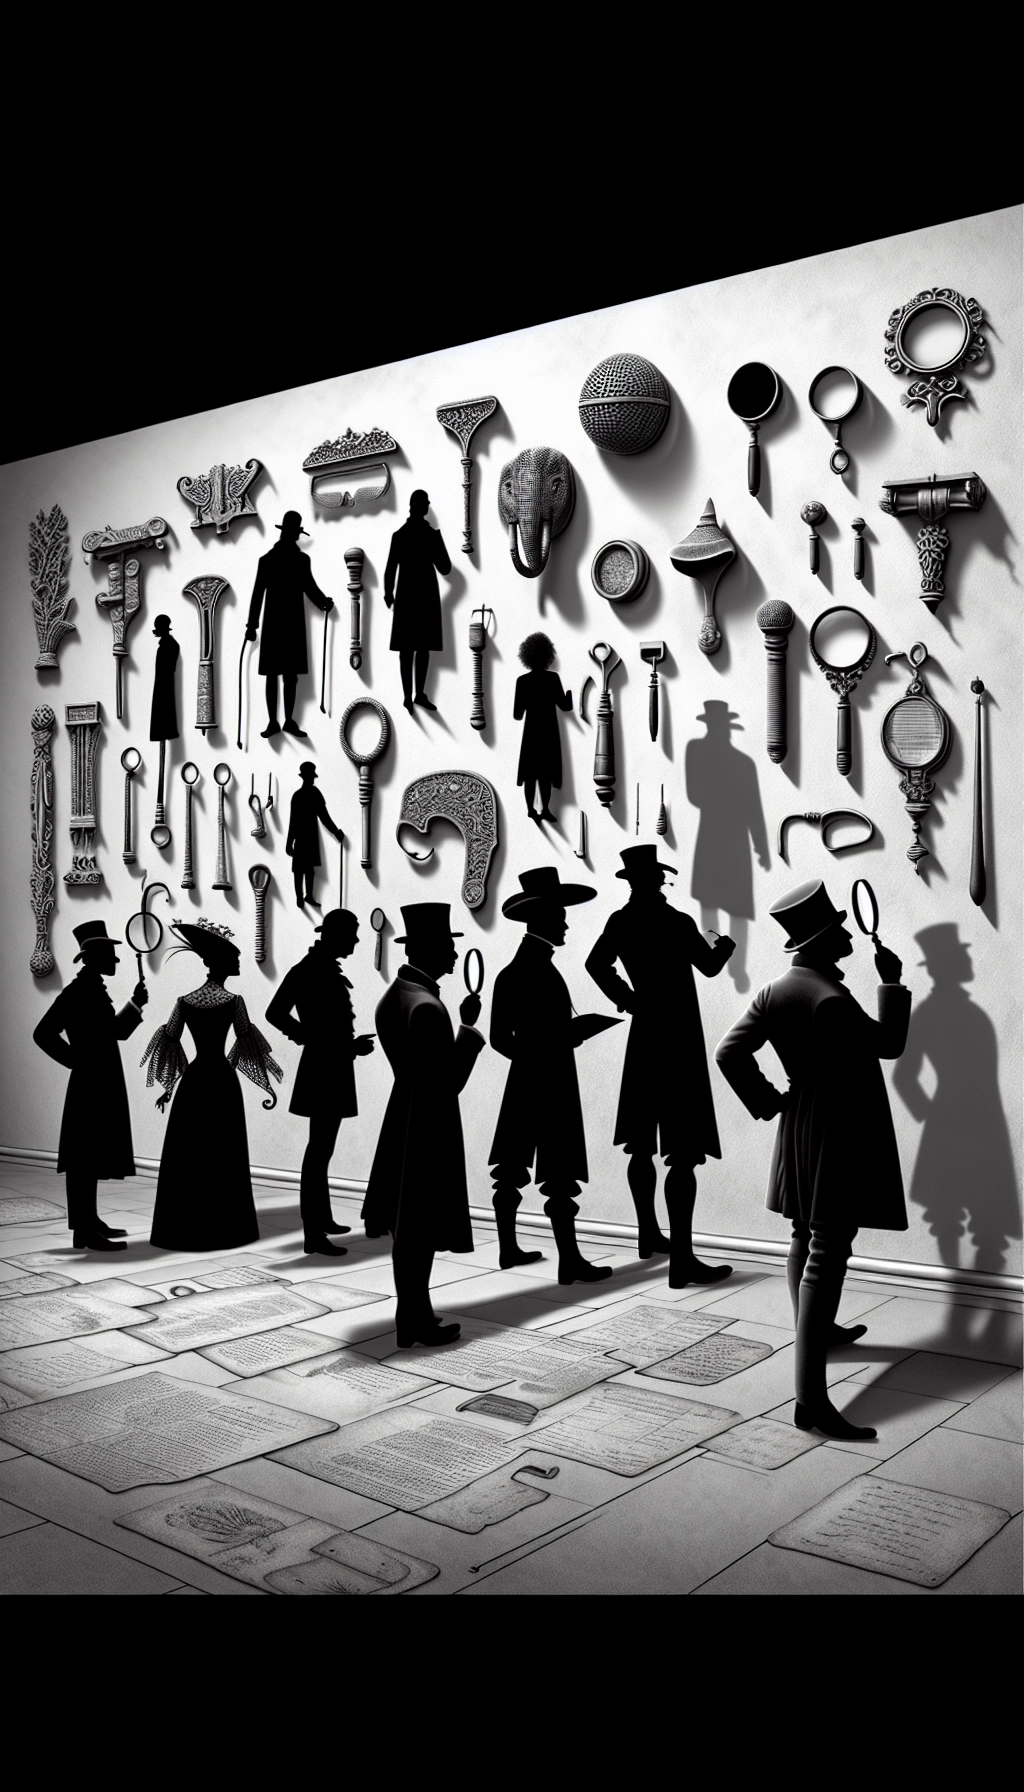 An eclectic tableau of shadowy figures inspecting a wall-mounted display featuring silhouettes of bizarre, antique tools, each casting a unique shadow that hints at its purpose. The figures, drawn in detailed Victorian attire, hold magnifying glasses and ancient manuscripts, contrasting with the minimalist, enigmatic tools, creating a visual puzzle that invites the viewer to decipher the implements' uses.